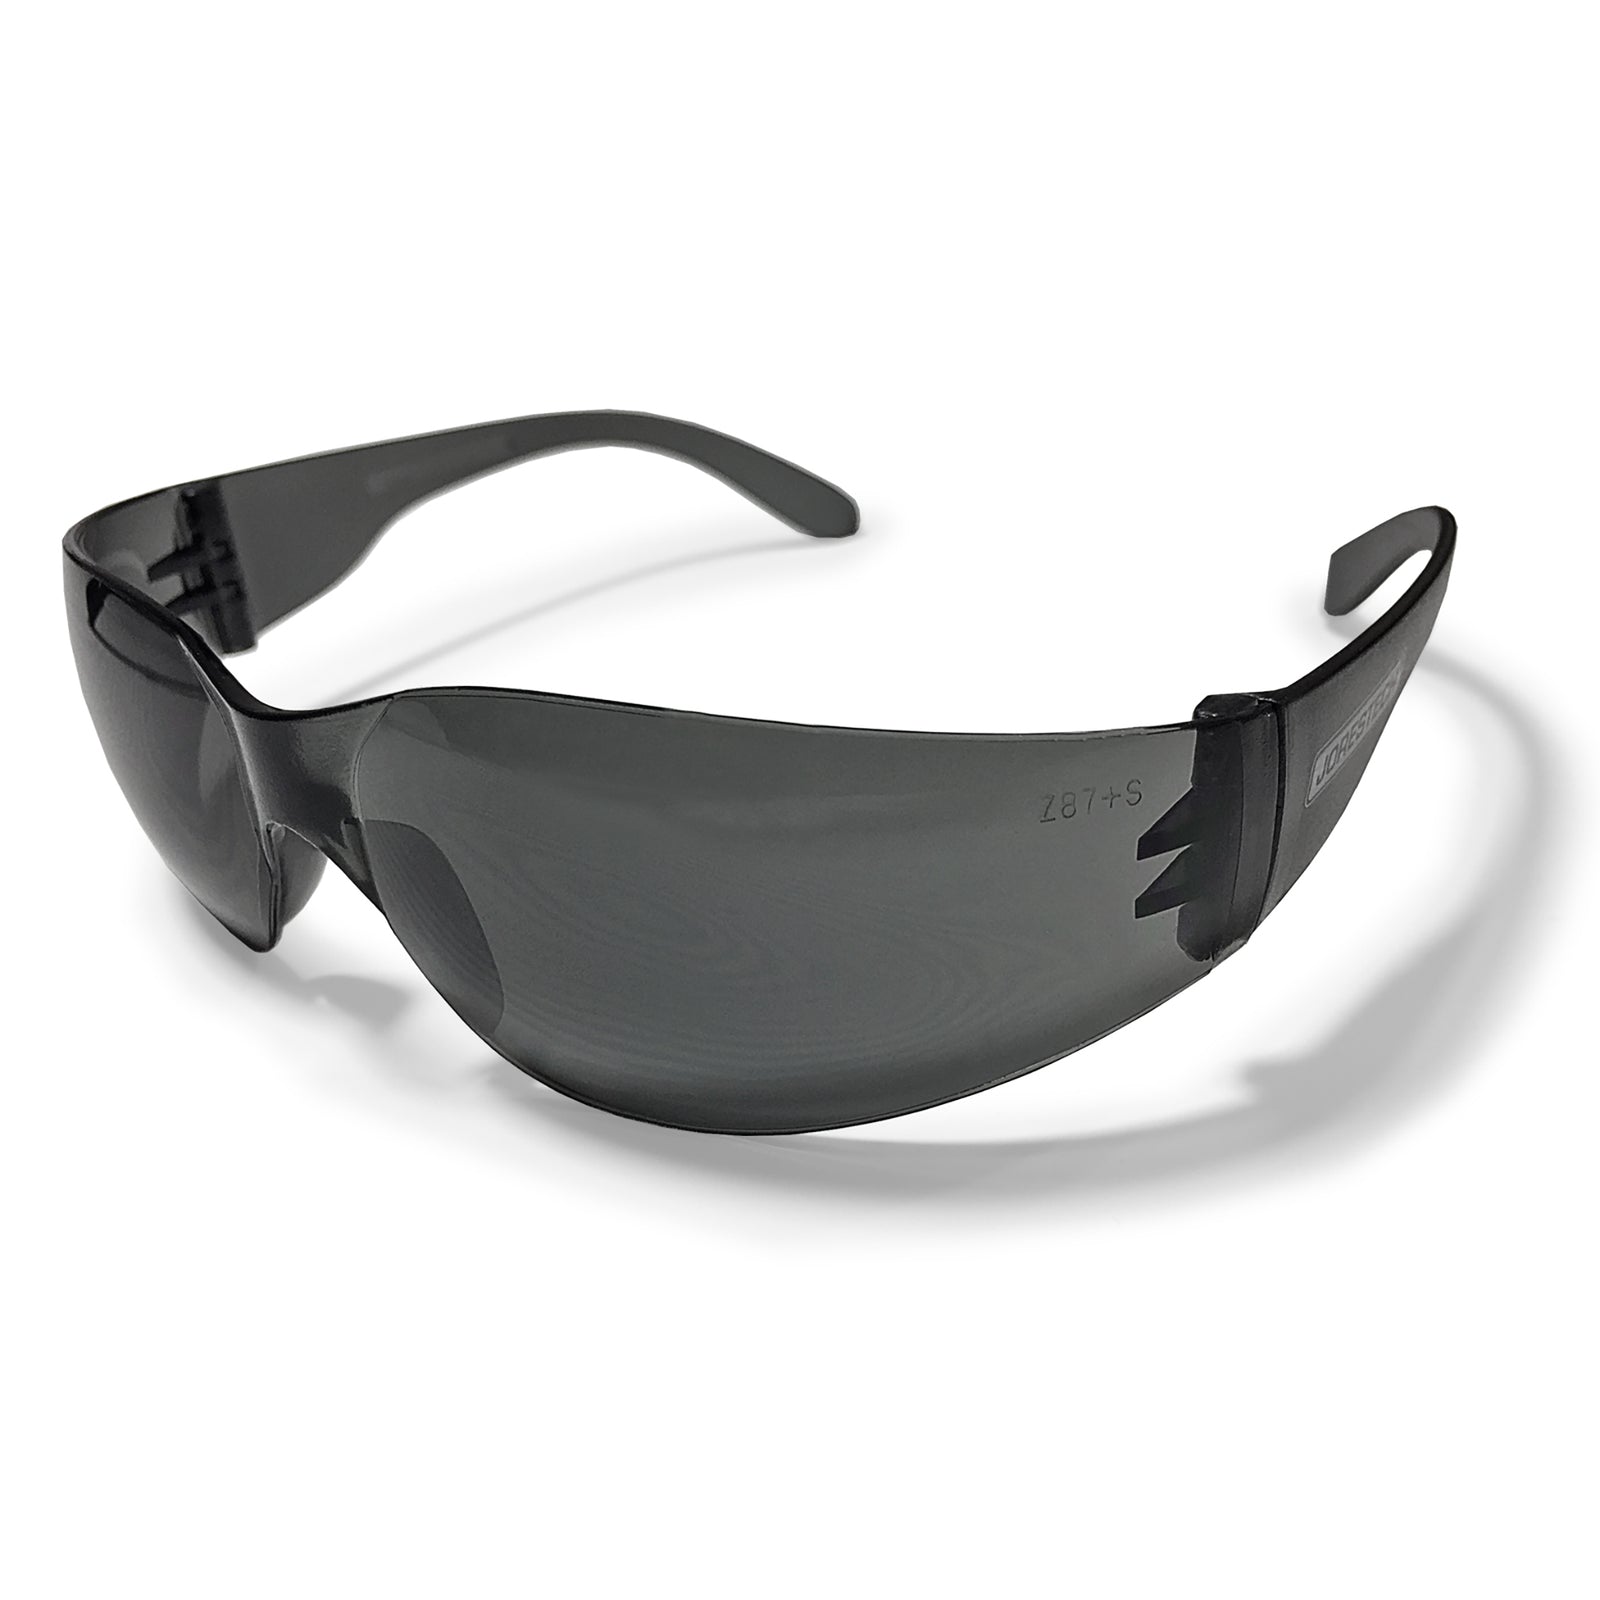 Features one JORESTECH high impact glass with smoke polycarbonate lenses and smoke temples over white background